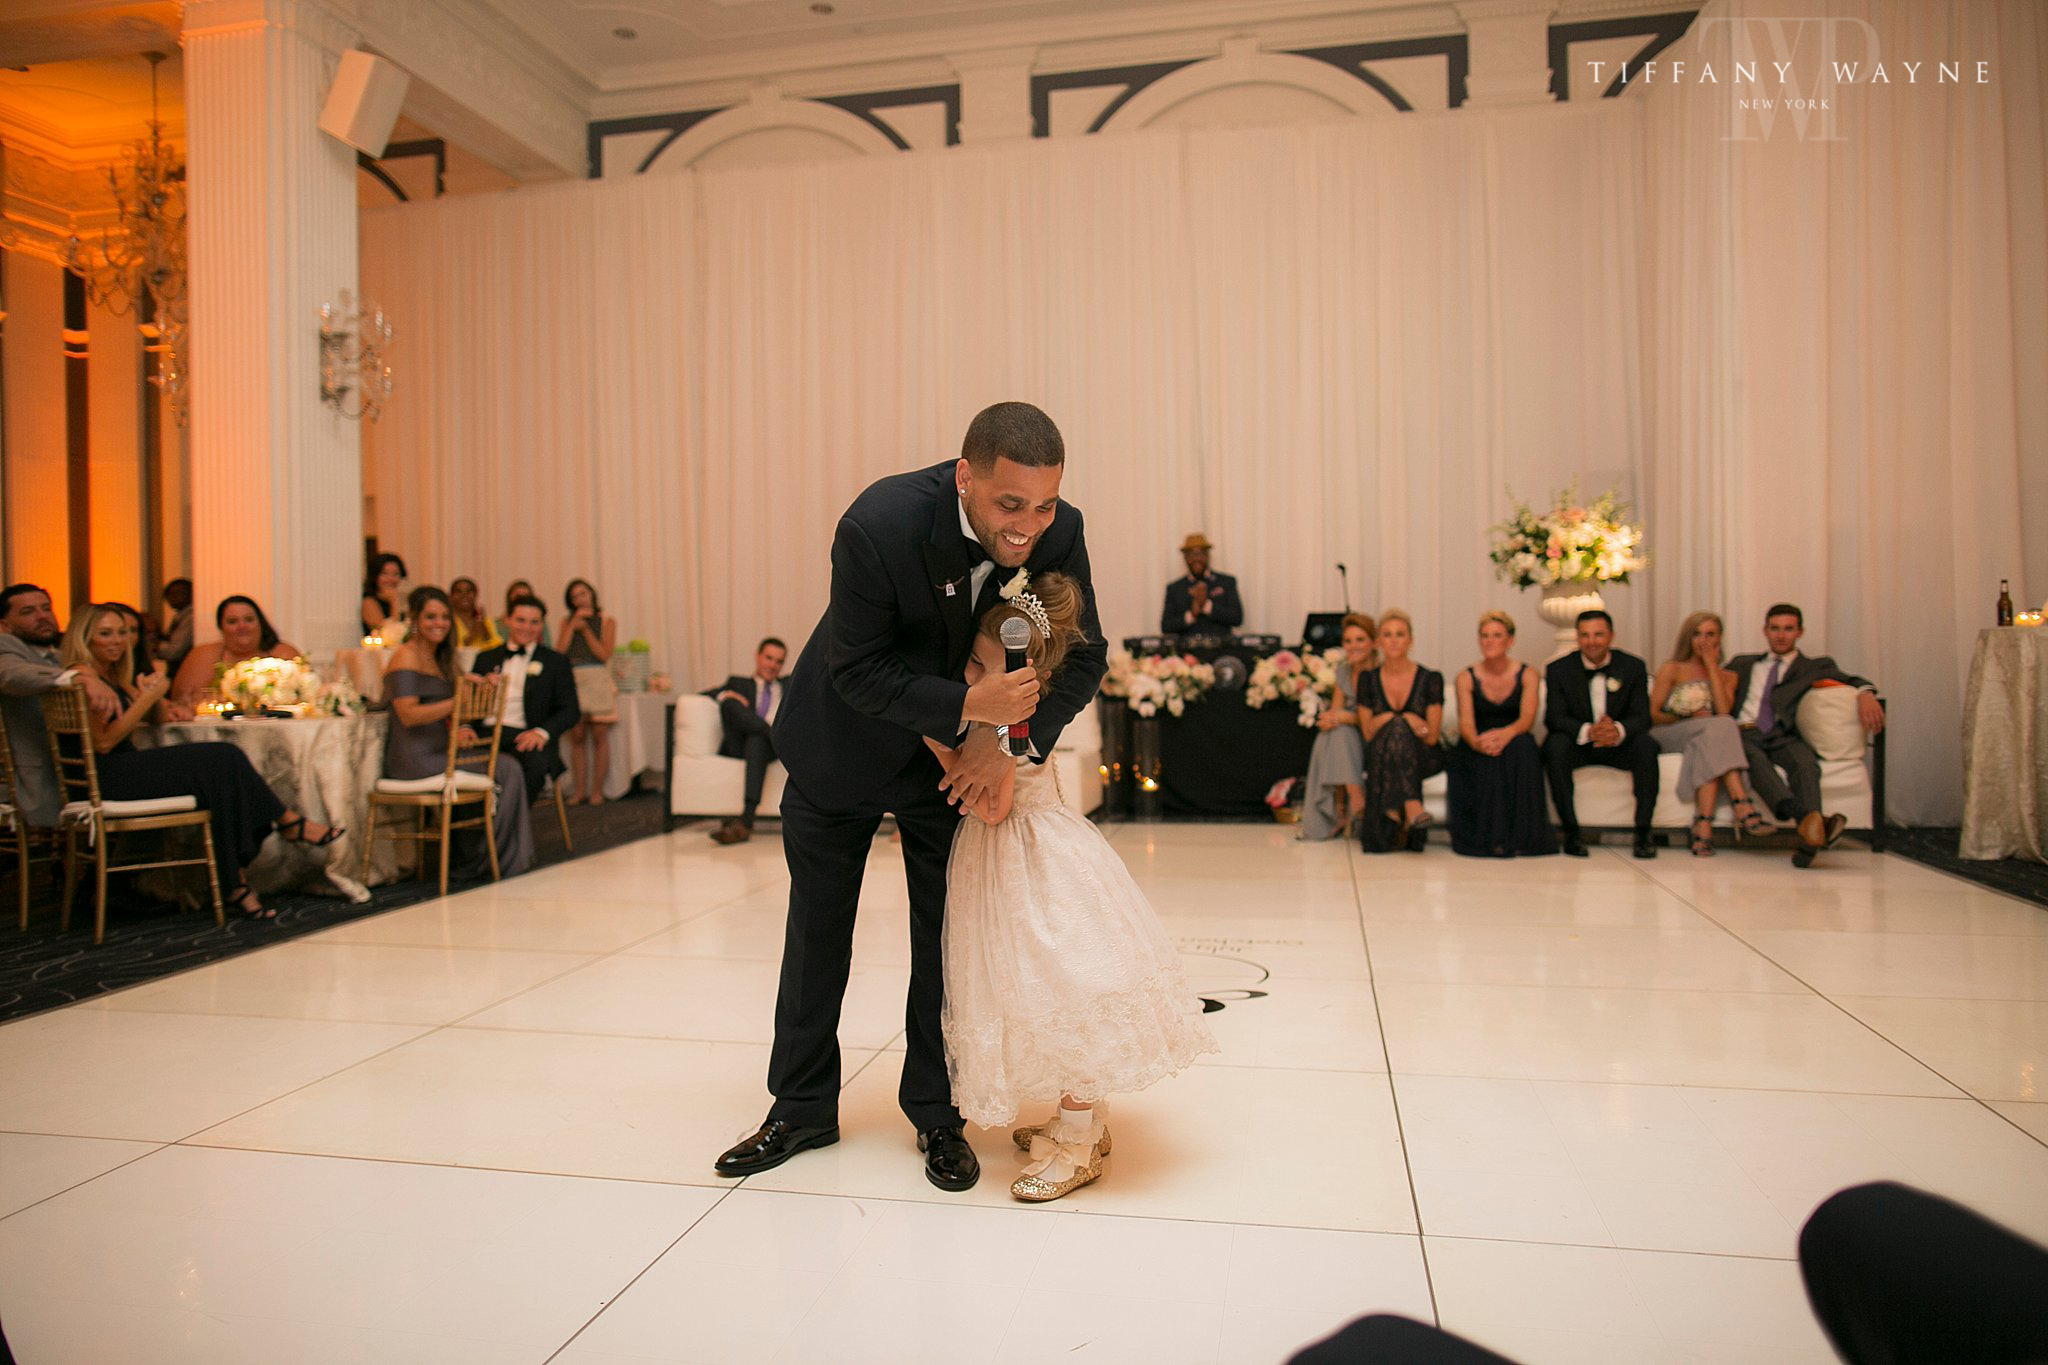 groom and flower girl at wedding reception photographed by Tiffany Wayne Photography